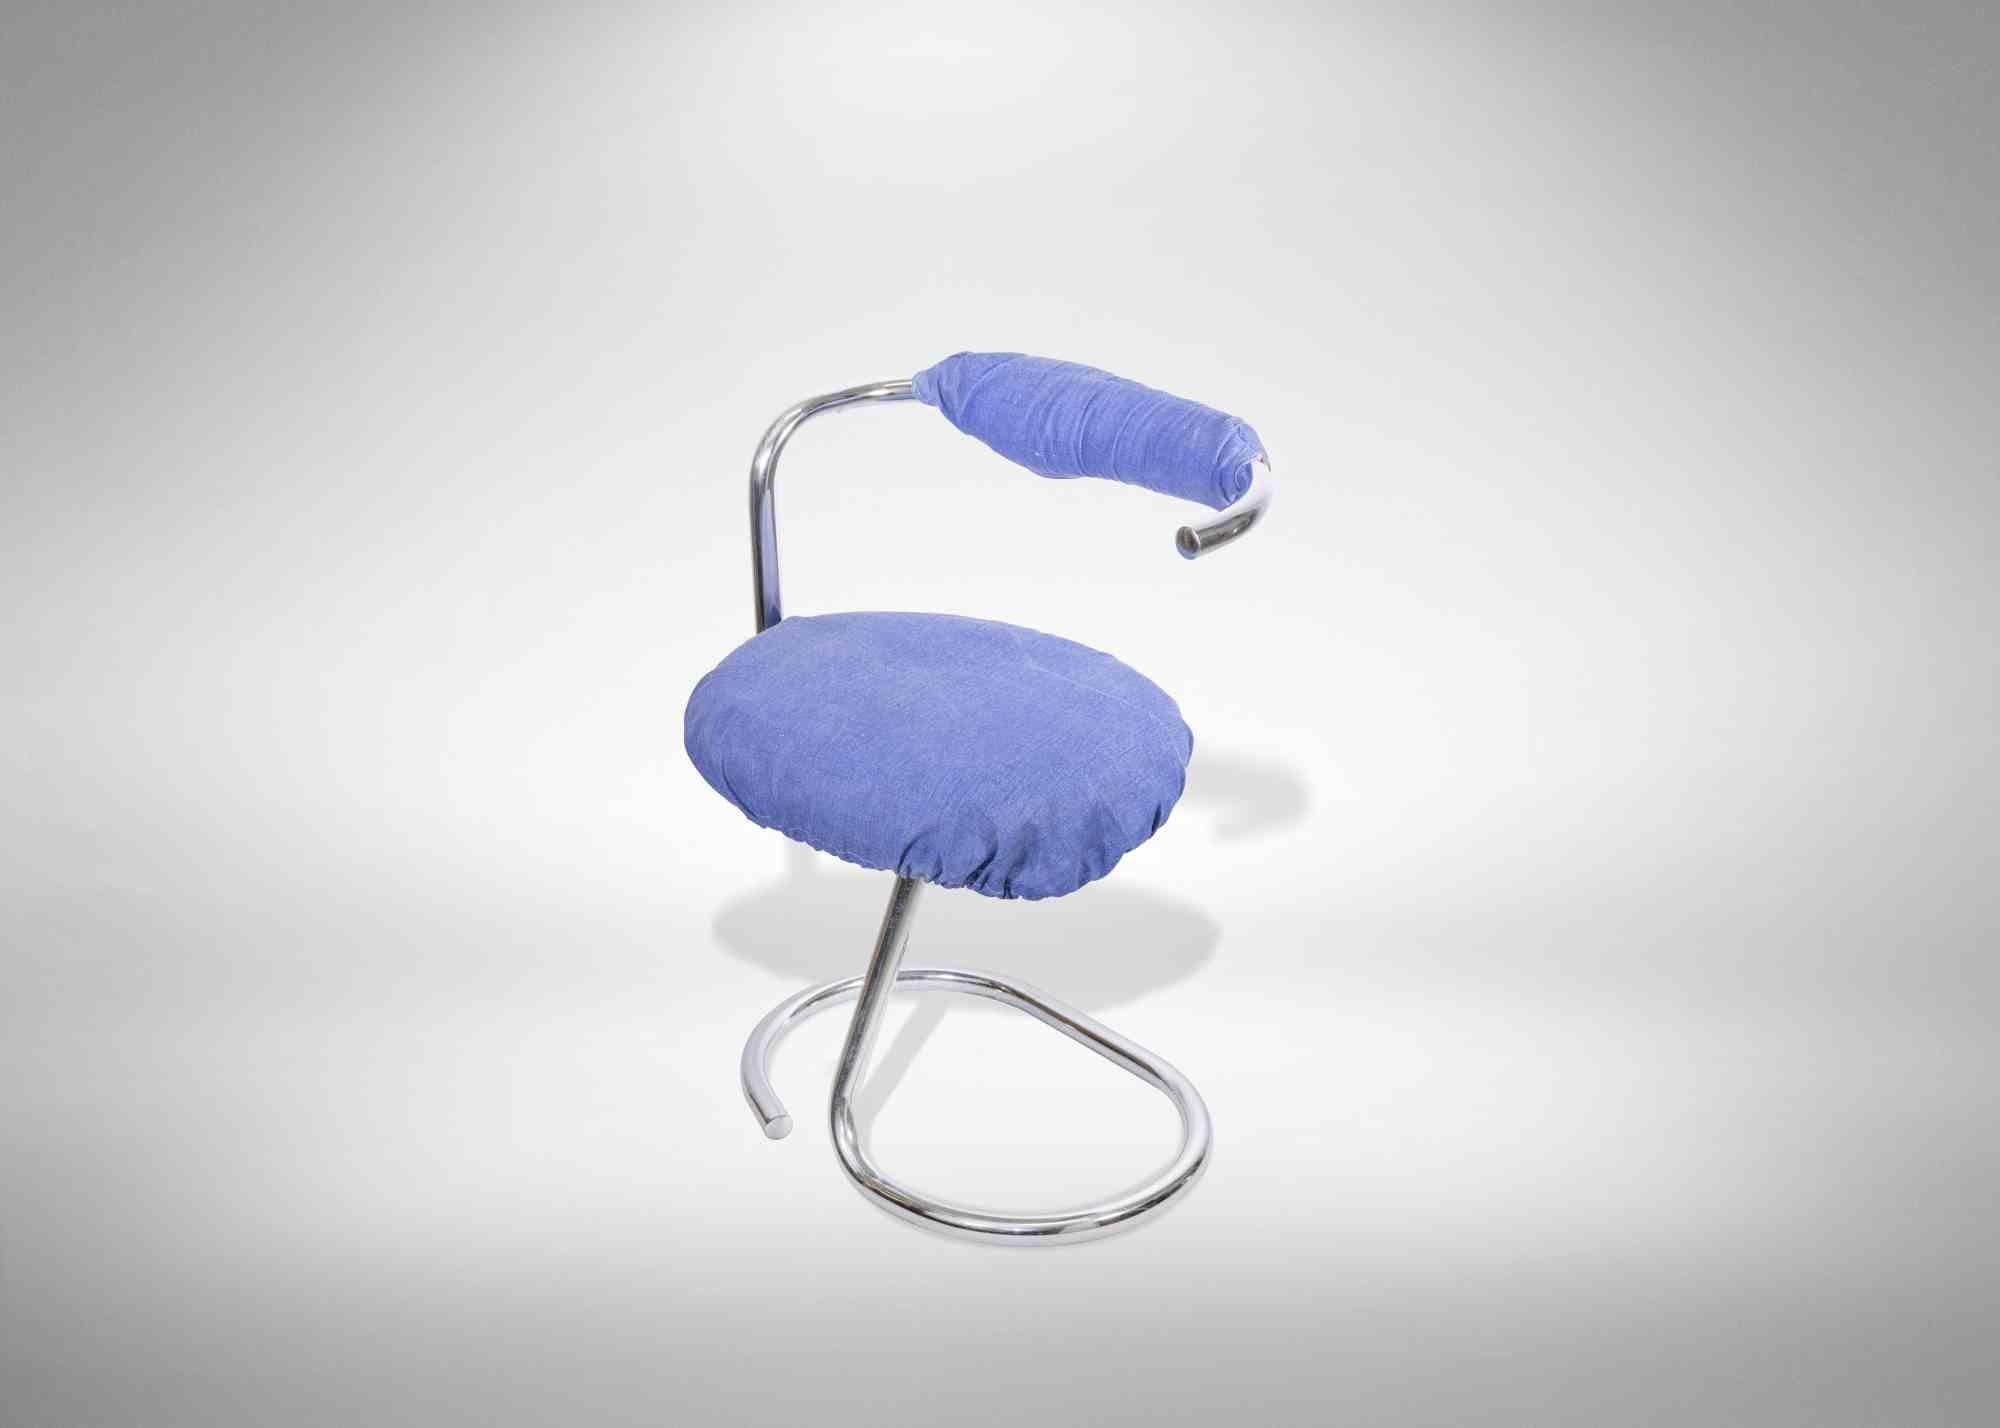 Cobra Chairs is an original set of six chairs realized in the 1970s by Giotto Stoppino (Milan, 1926).

Chromed tubular steel structure and light blue fabric.

This 'Cobra' chair was designed by Giotto Stoppino during the 1970s and produced in